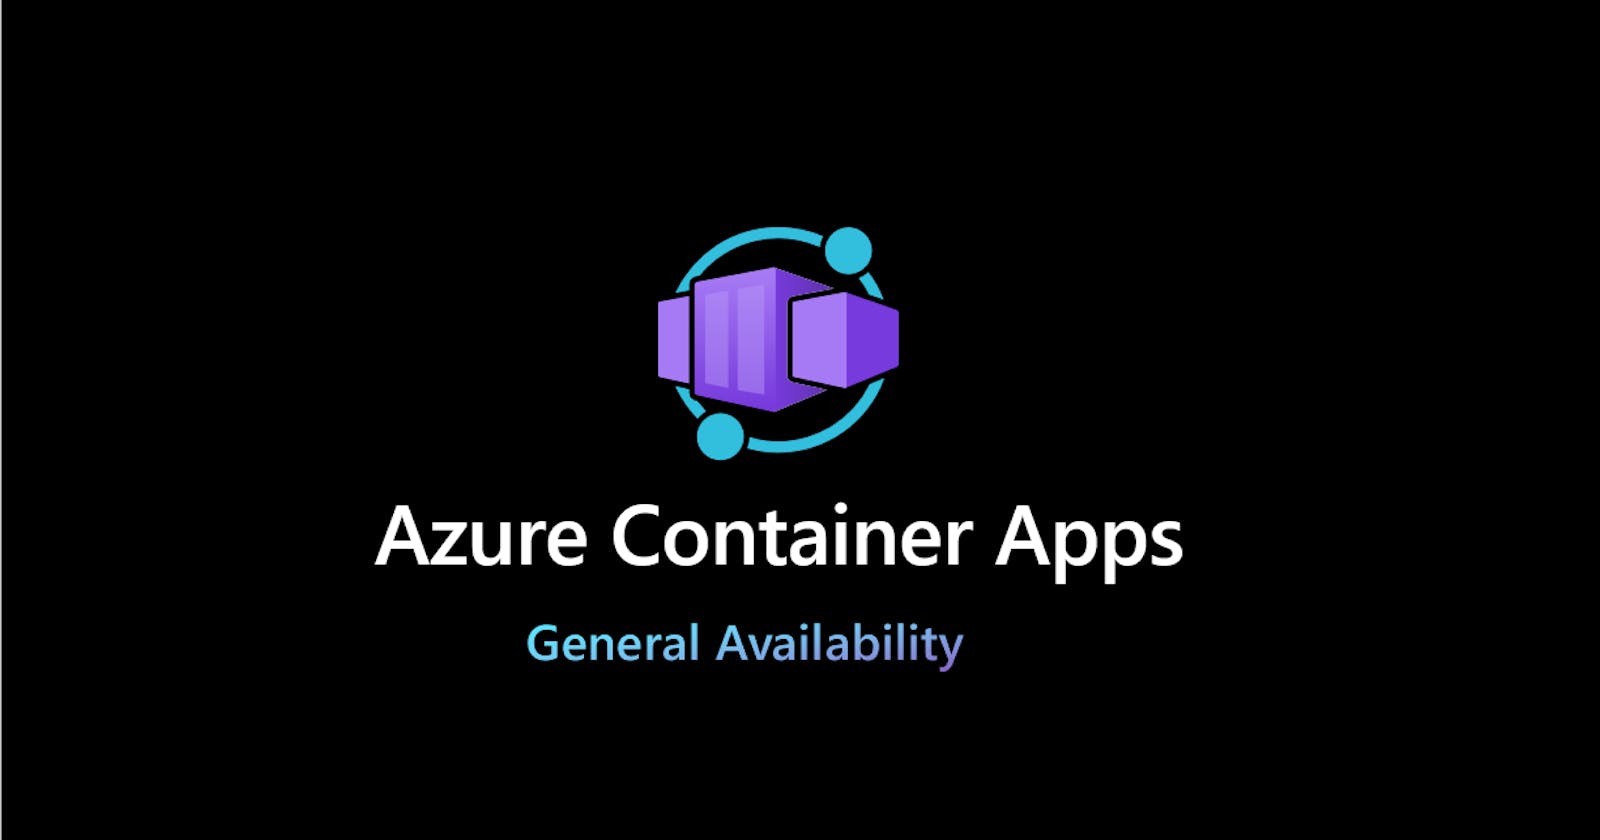 A Creative Dive into Container Apps